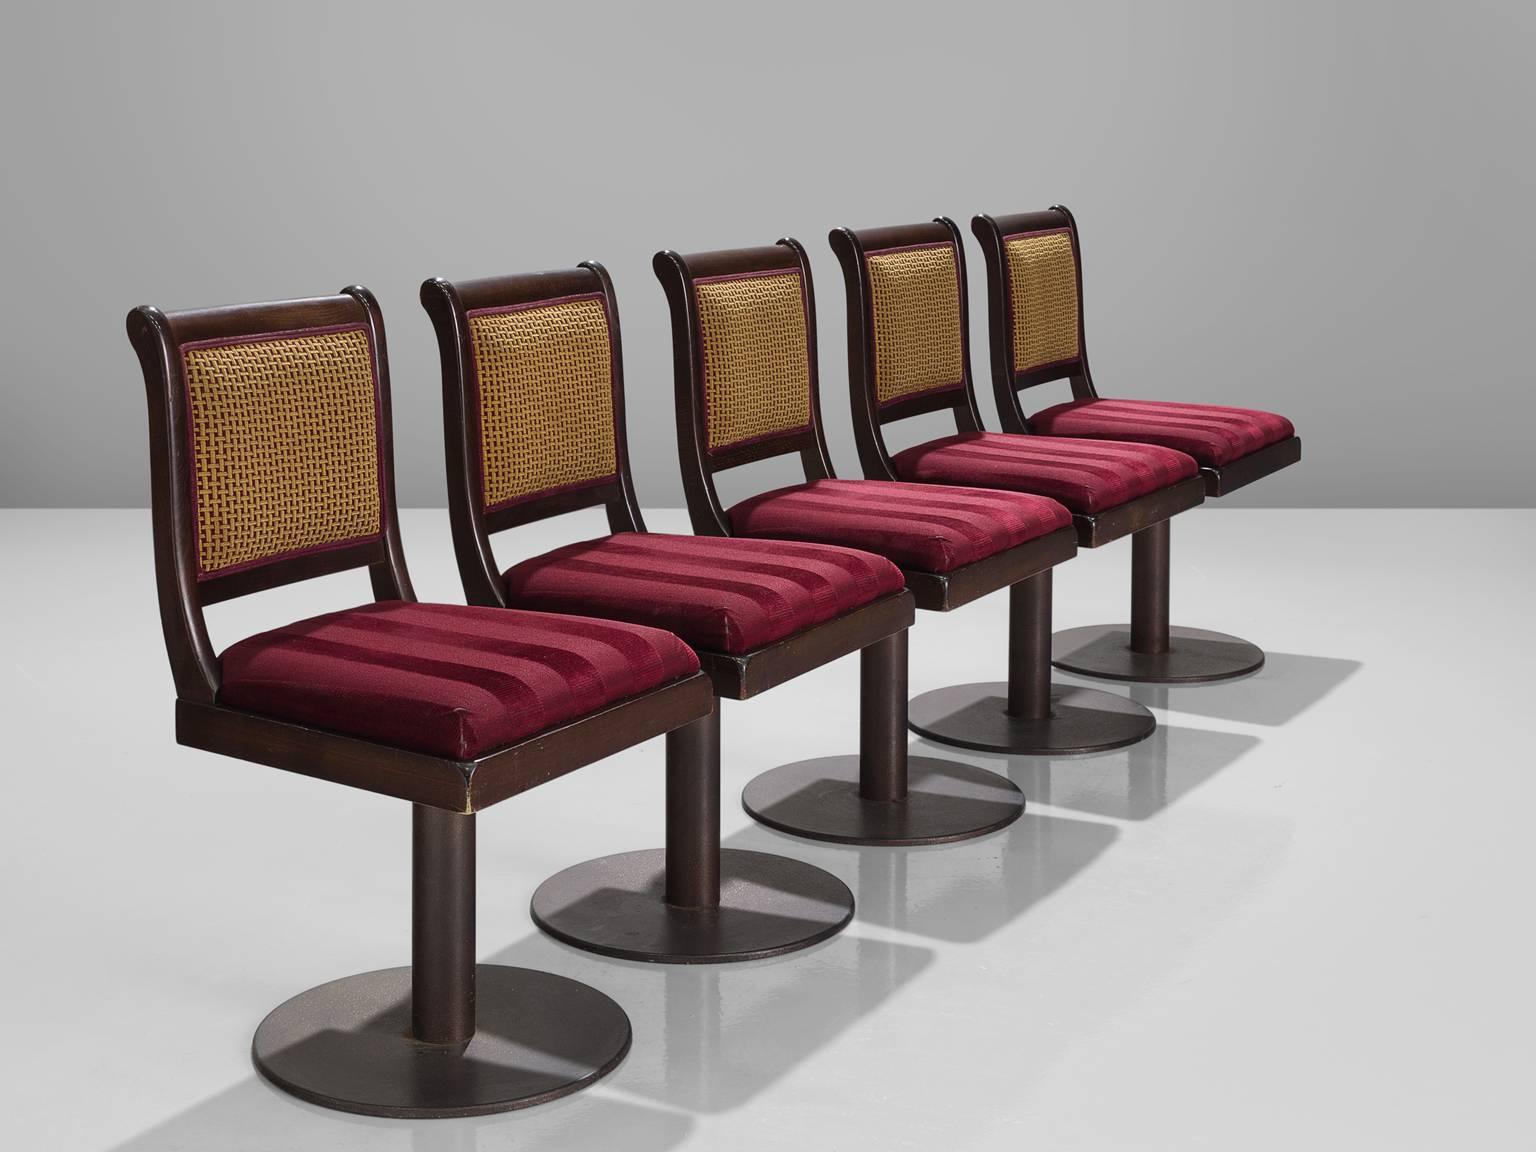 Bar stools, metal, red to purple fabric, stained wood, cane, Italy, 1980s.

This set of Classic Italian Casino barstools is upholstered with the original red striped fabric on a metal base. The stools have square seat with striped red original